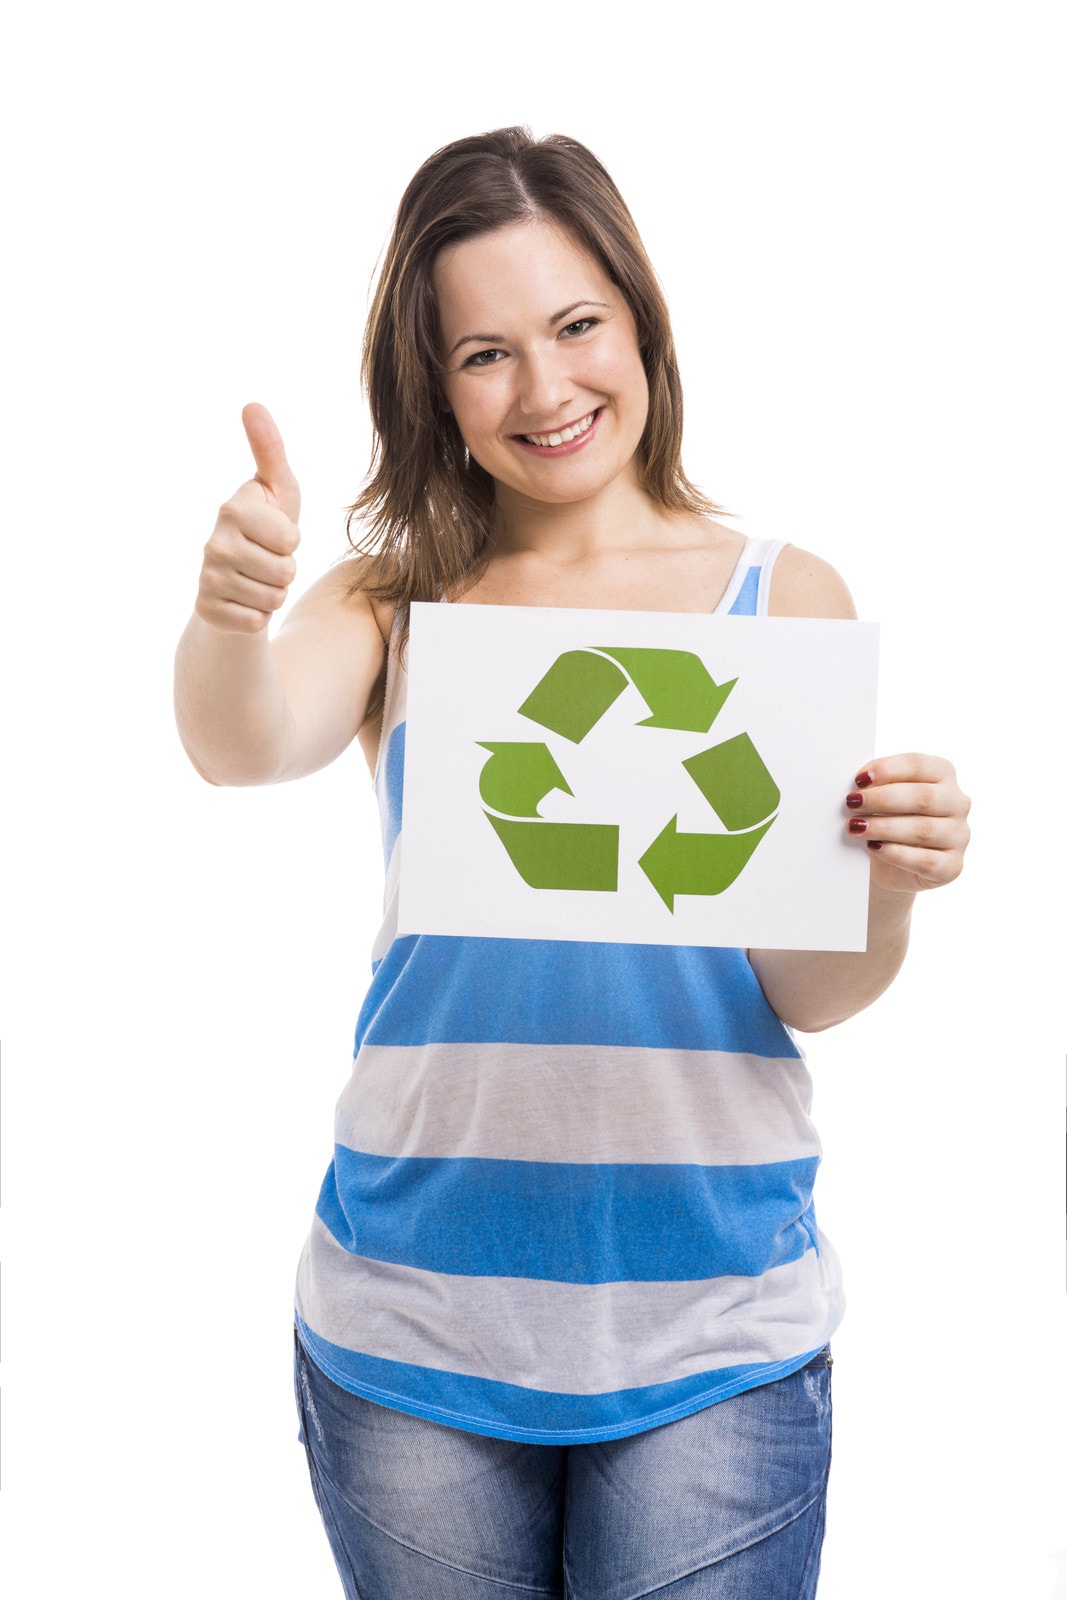 Fun Facts About Recycling for Kids